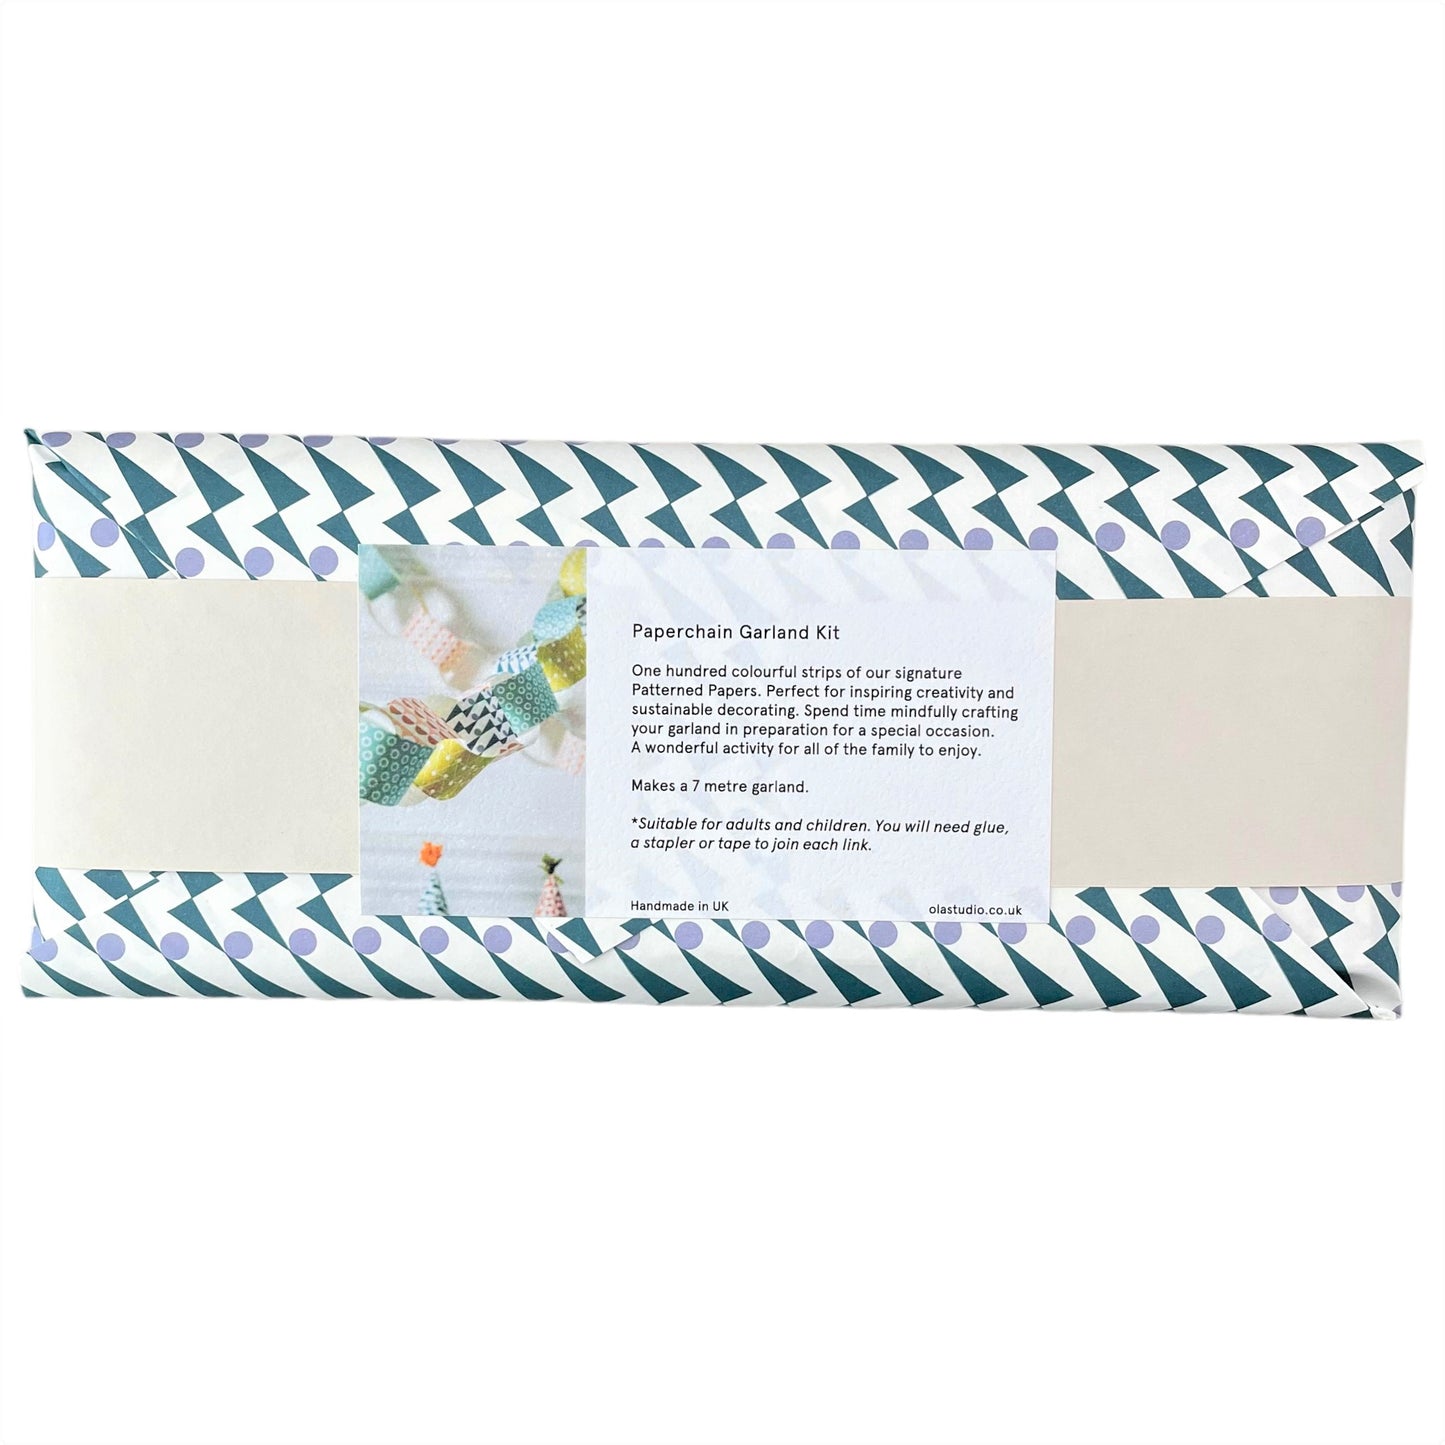 A paperchain of different patterned geometric papers in colours of mustard, orange, aqua and teal, the reverse of the outer patterned envelope packaging showing contents